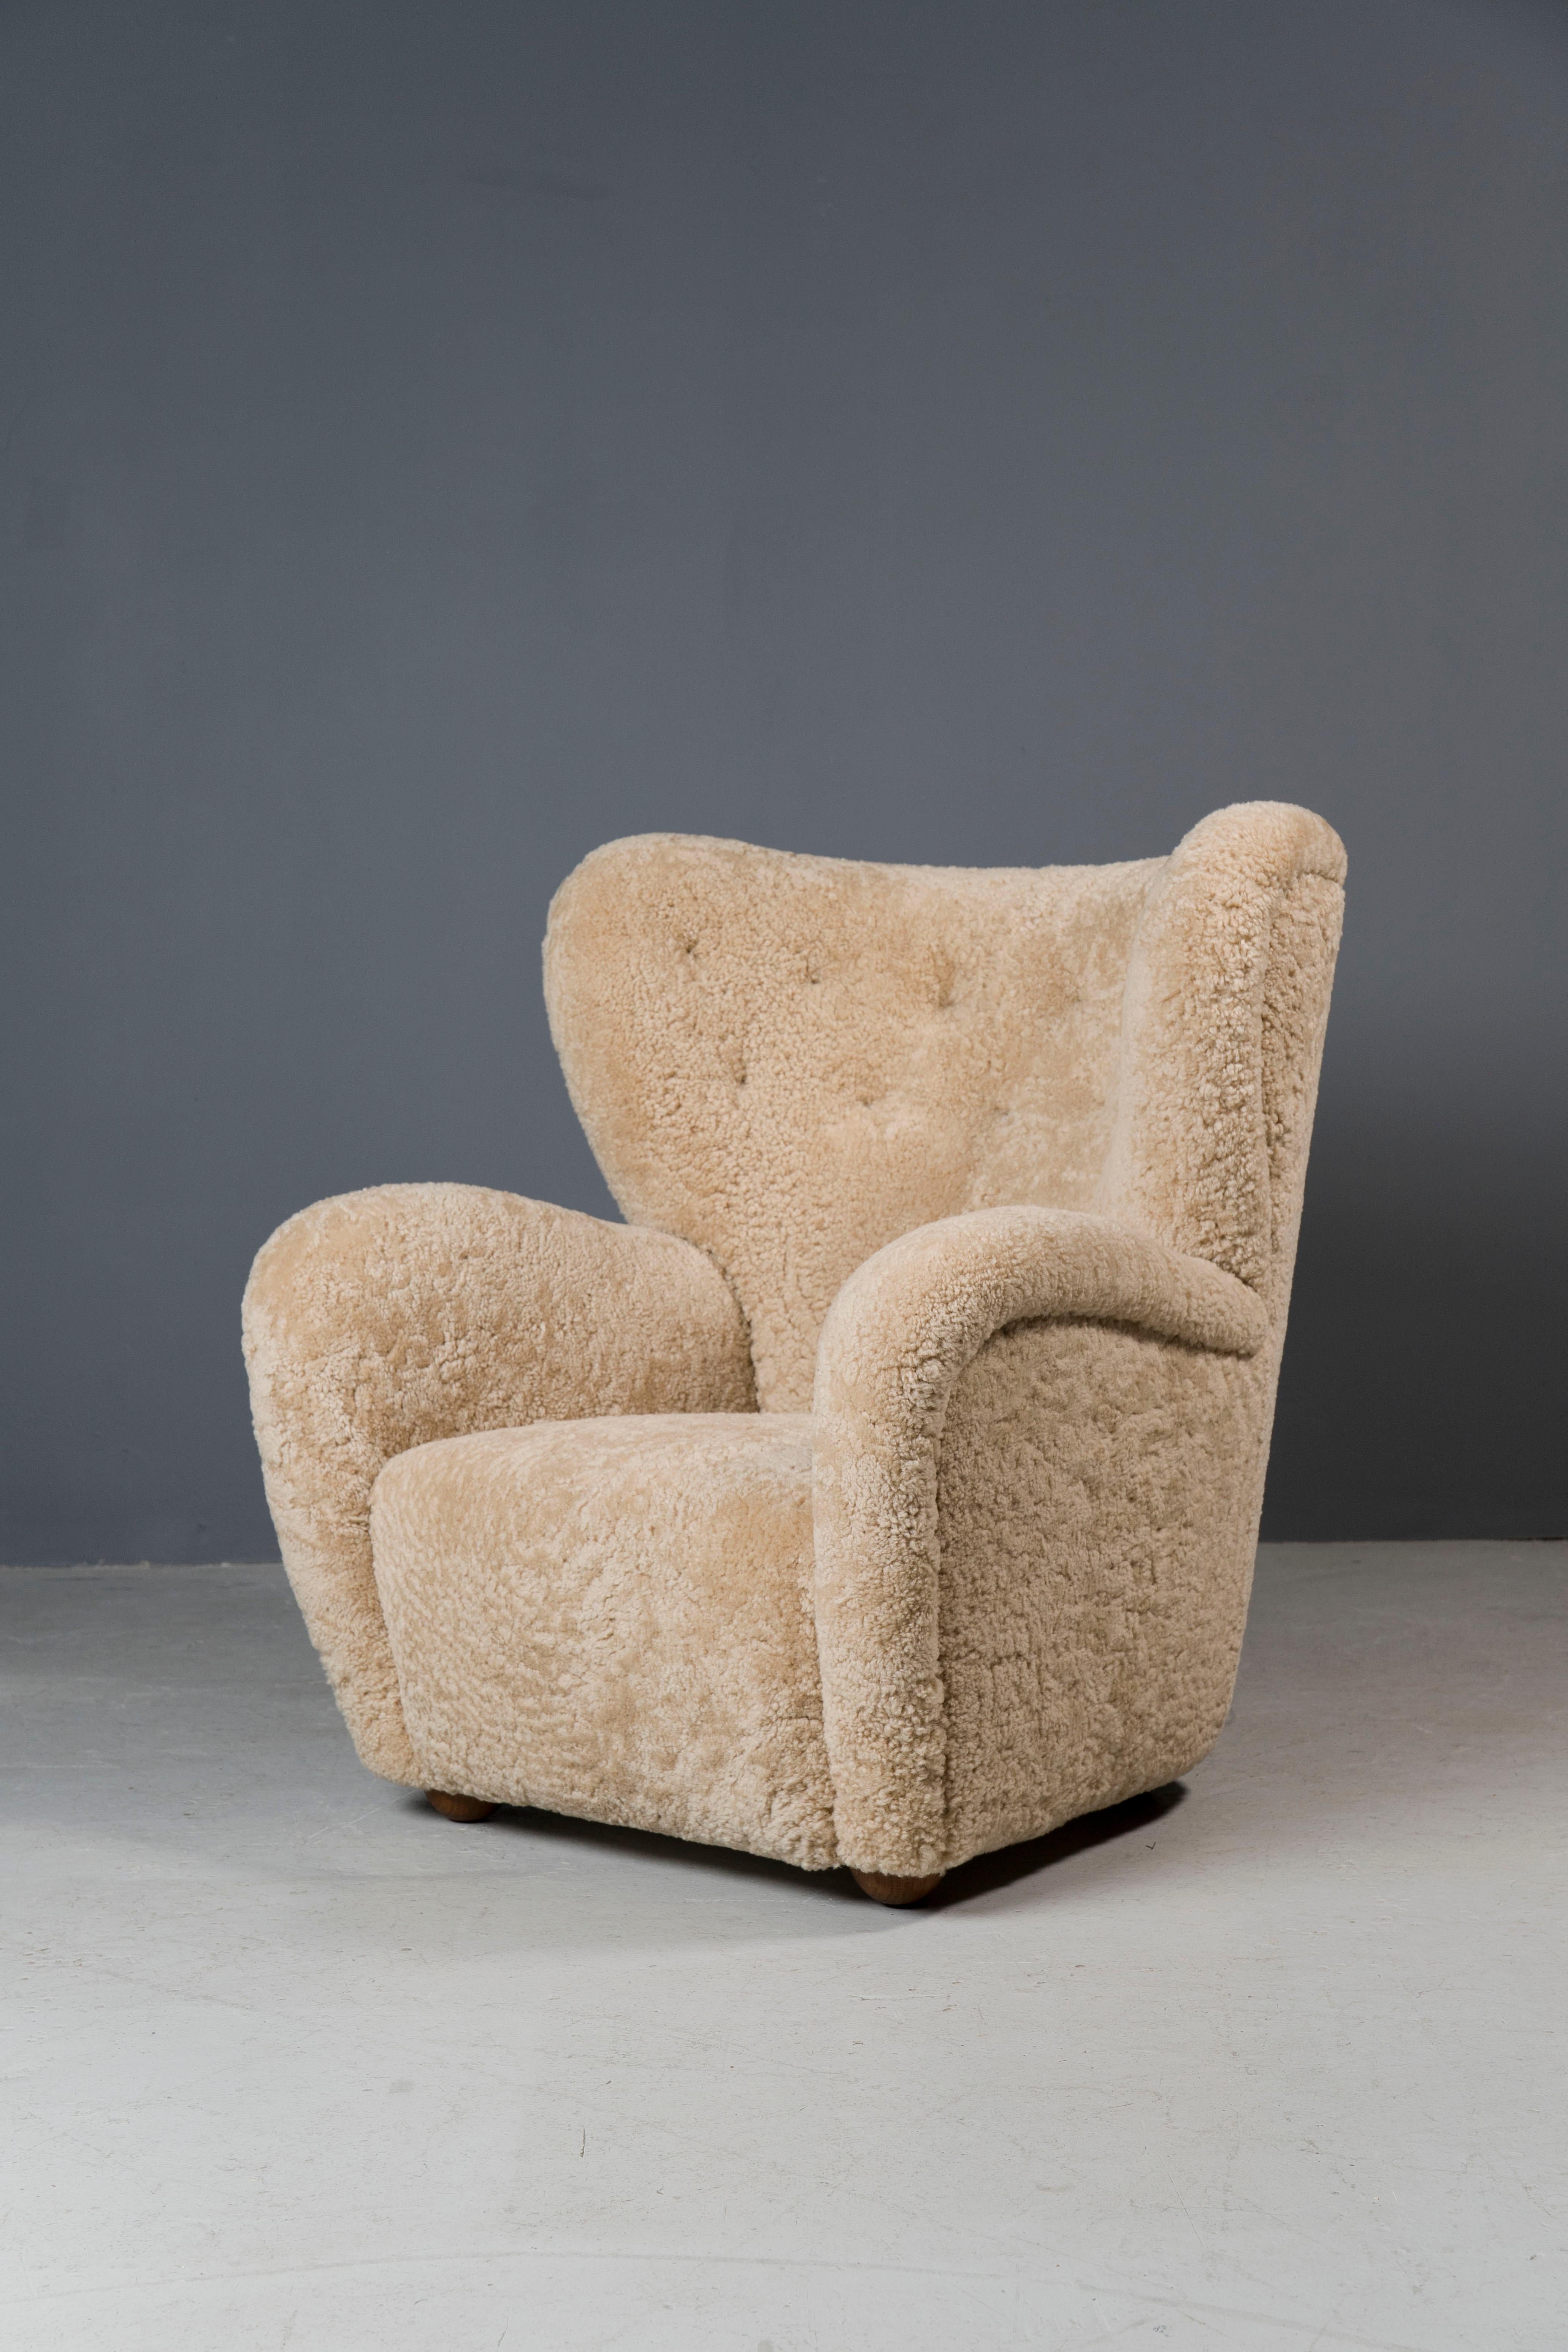 Swedish vintage 1940s sculptural longe chair, newly upholstered in Australian
shearling hides with brown leather buttons.

Gorgeous form, extreme comfort.